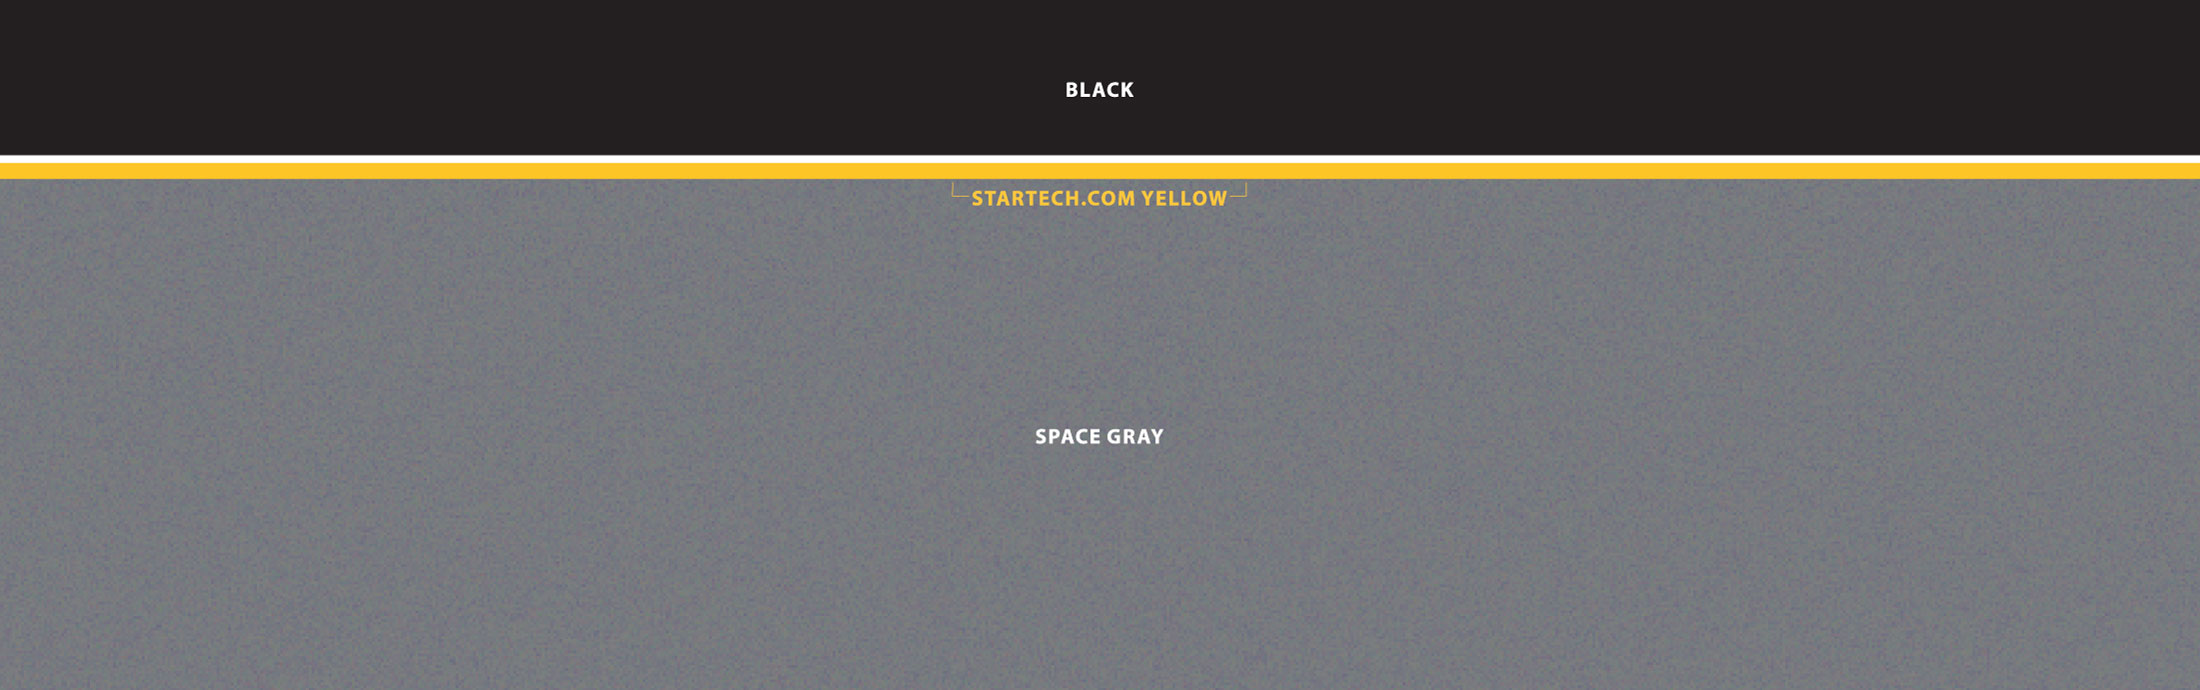 Startech.com Visual Style Guide Colorway